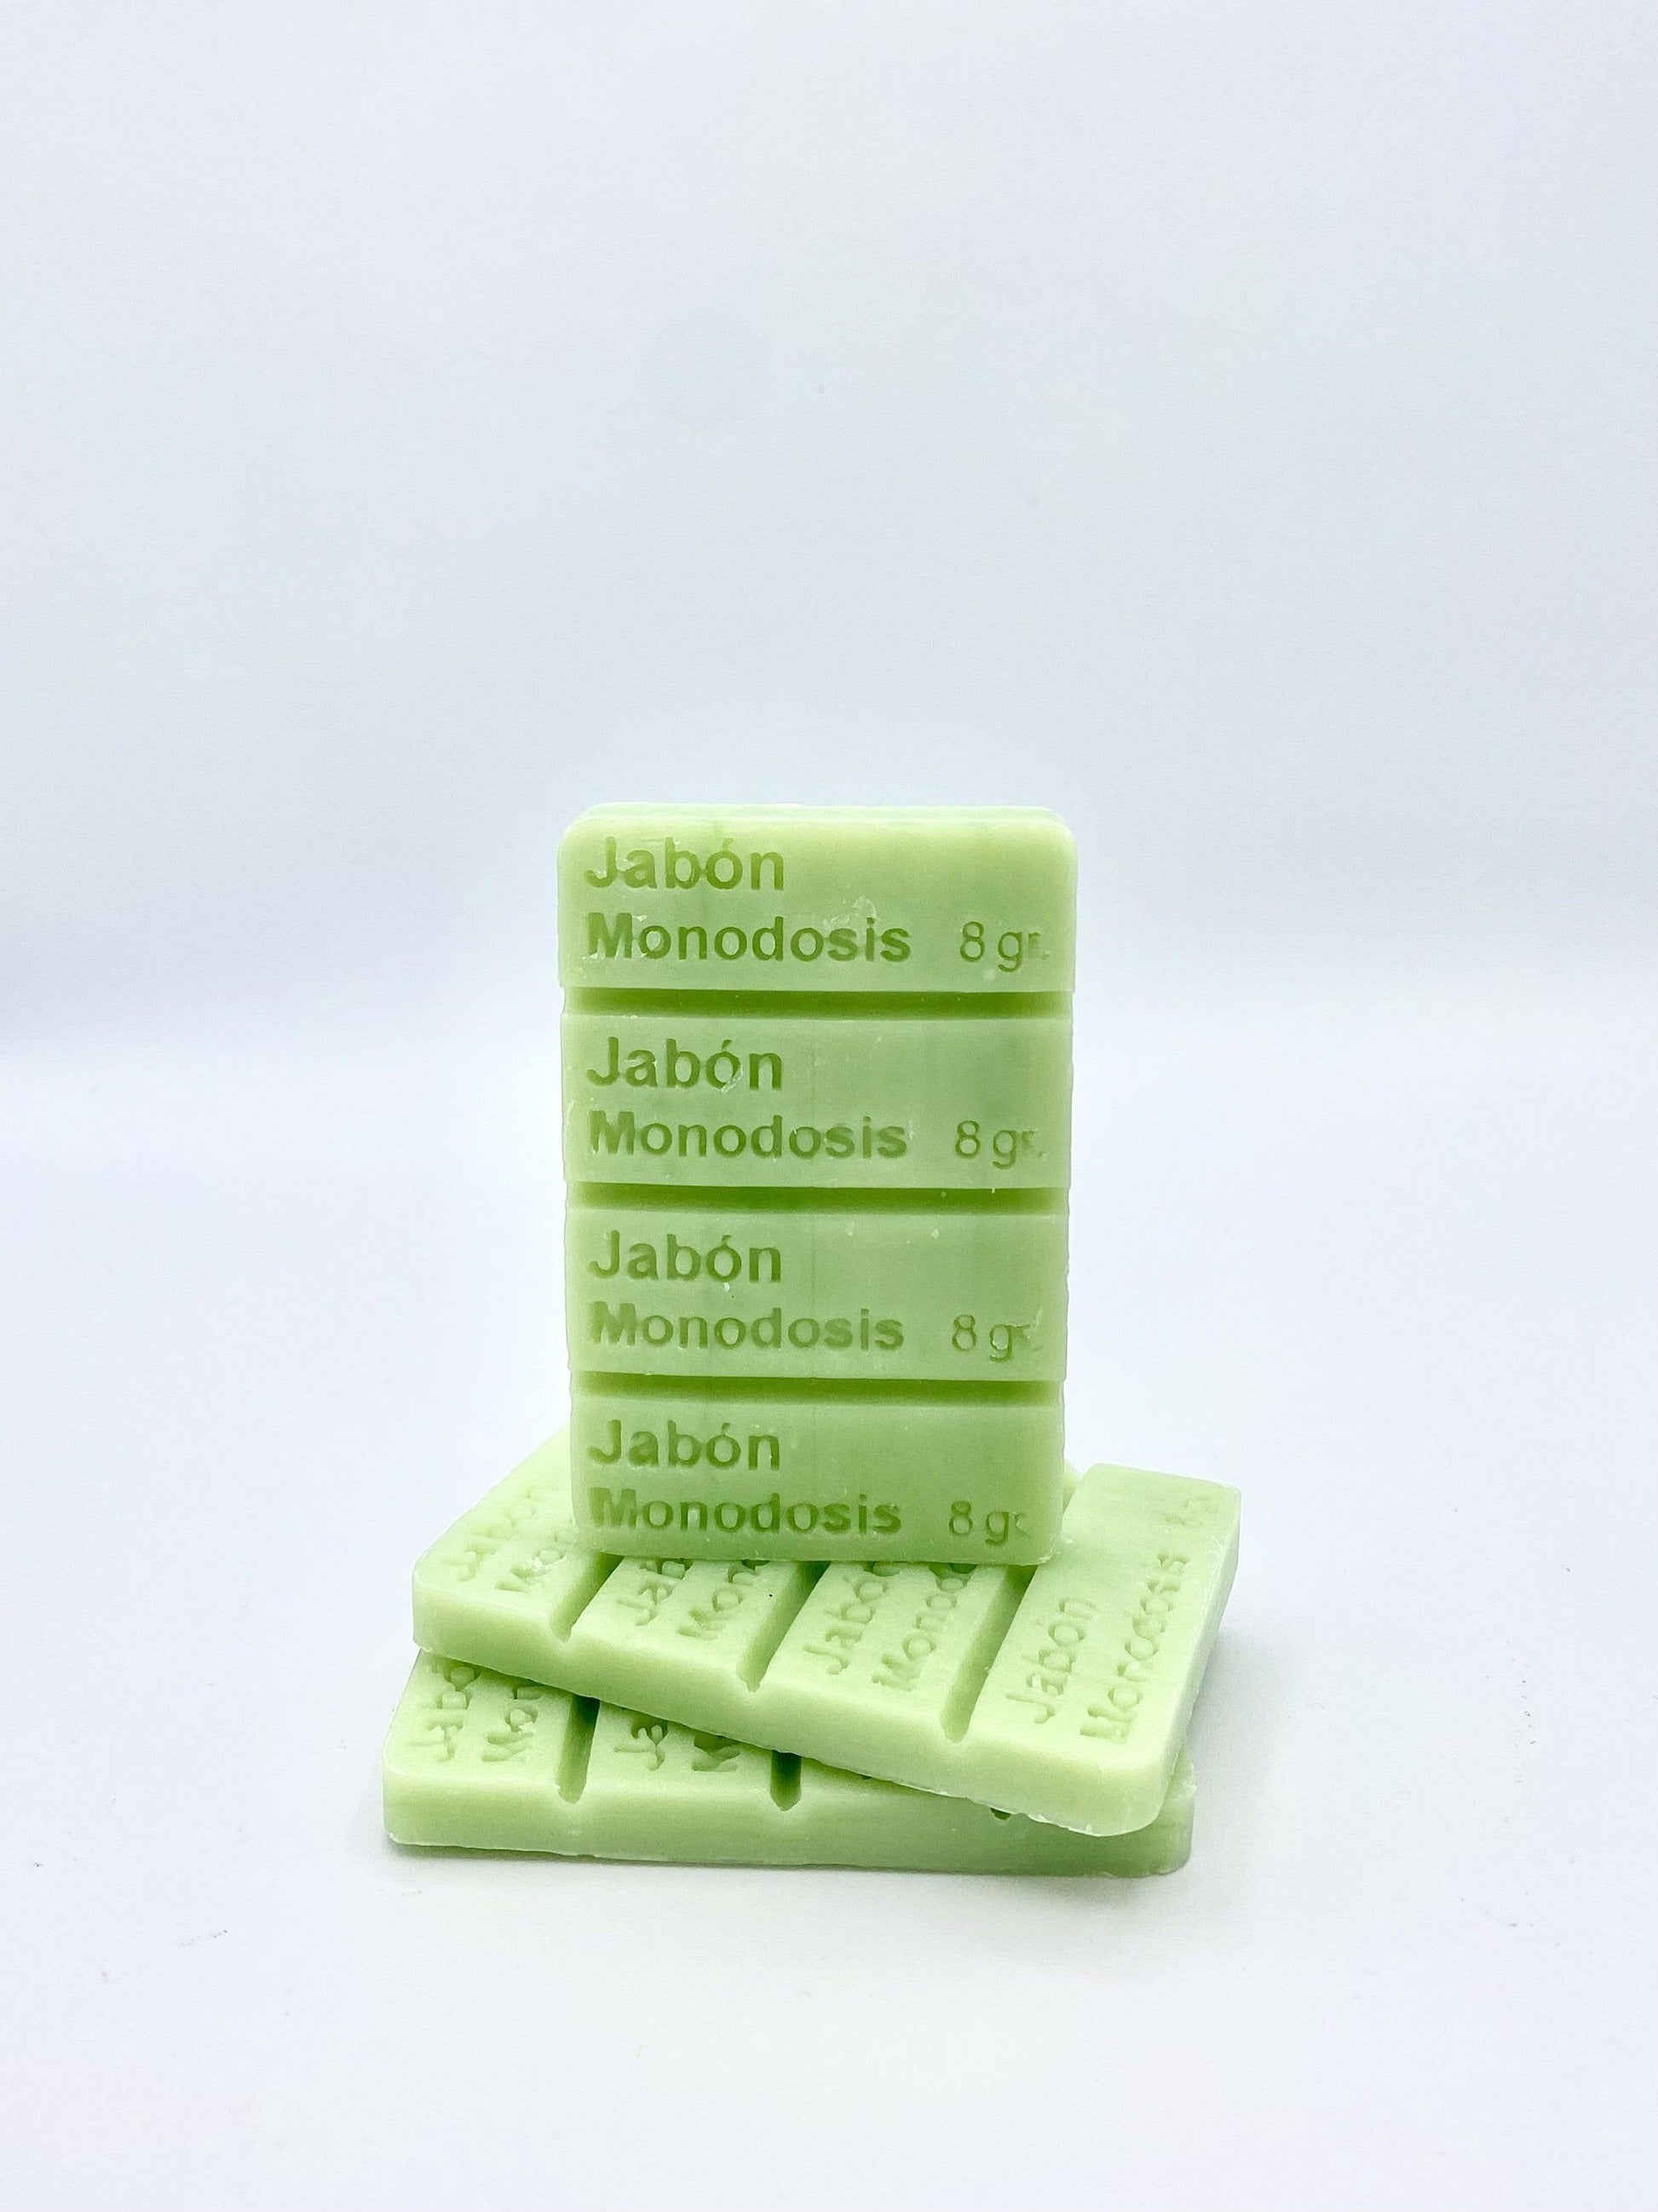 Fresh grass soap by Iberica made in Spain